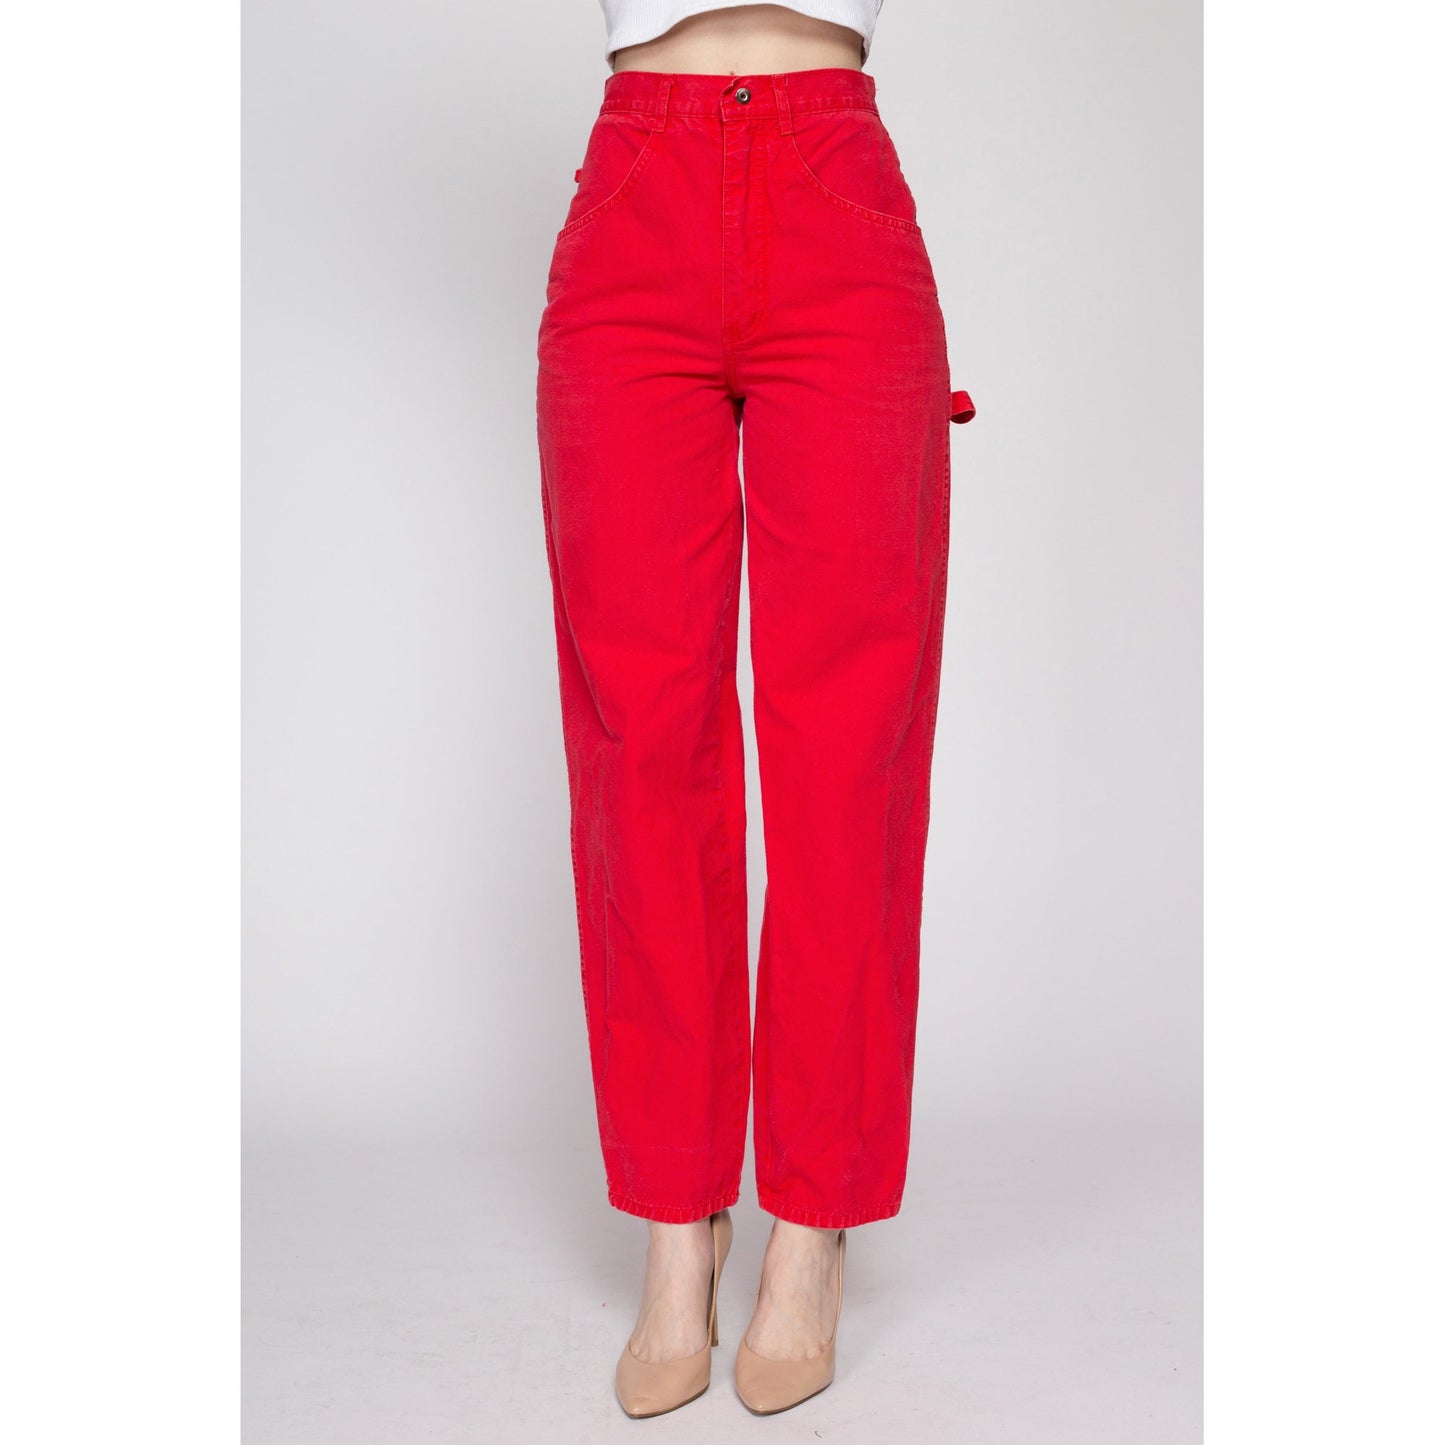 XS 80s Red Cotton Carpenter Pants 25" | Vintage High Waisted Tapered Leg Retro Trousers